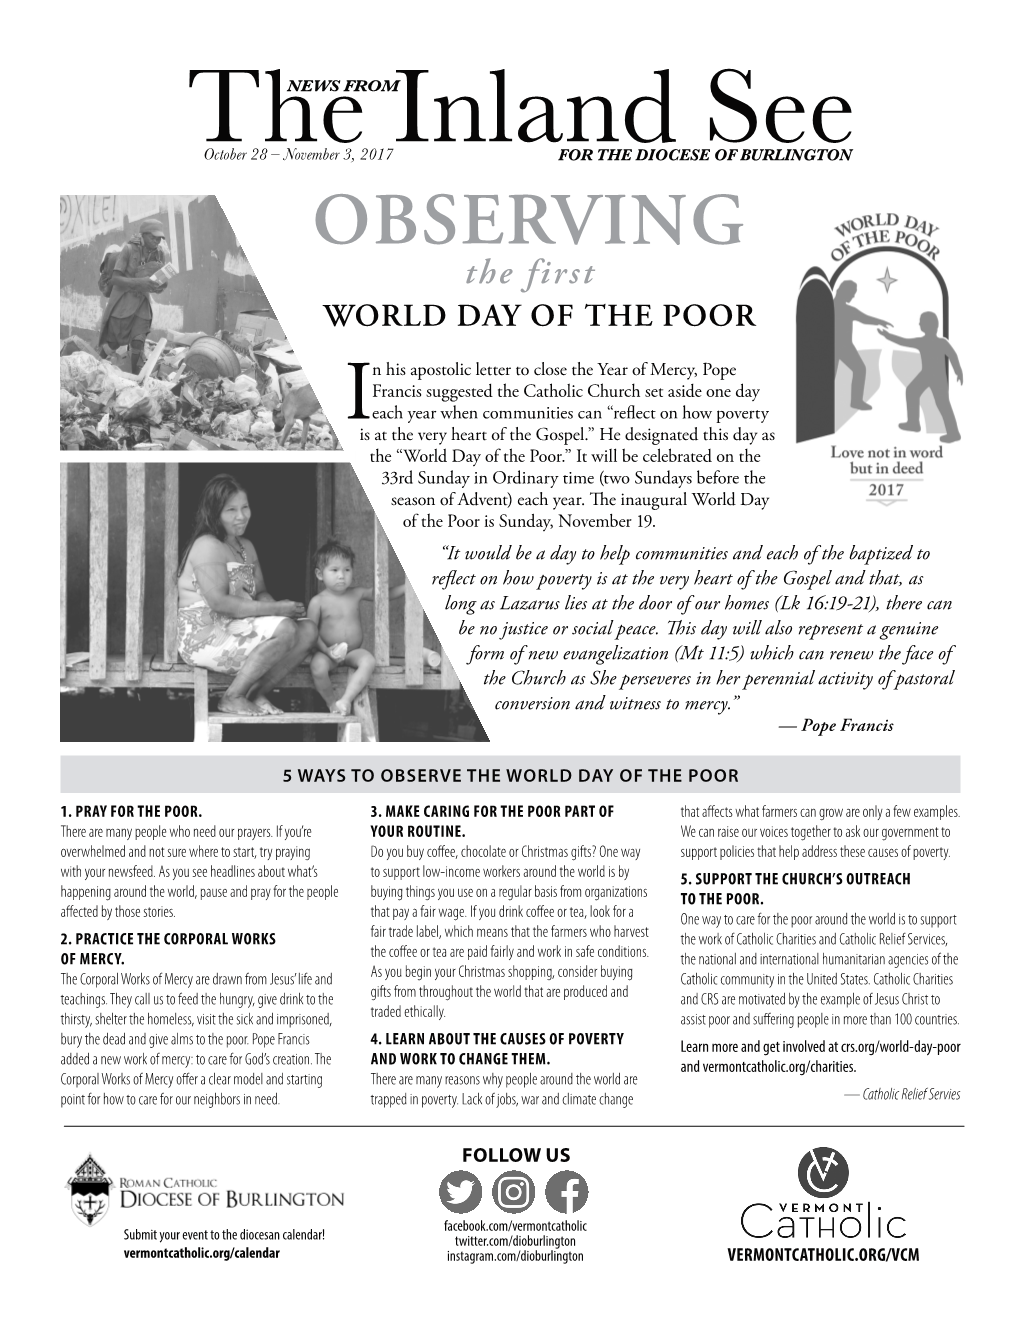 OBSERVING the First WORLD DAY of the POOR